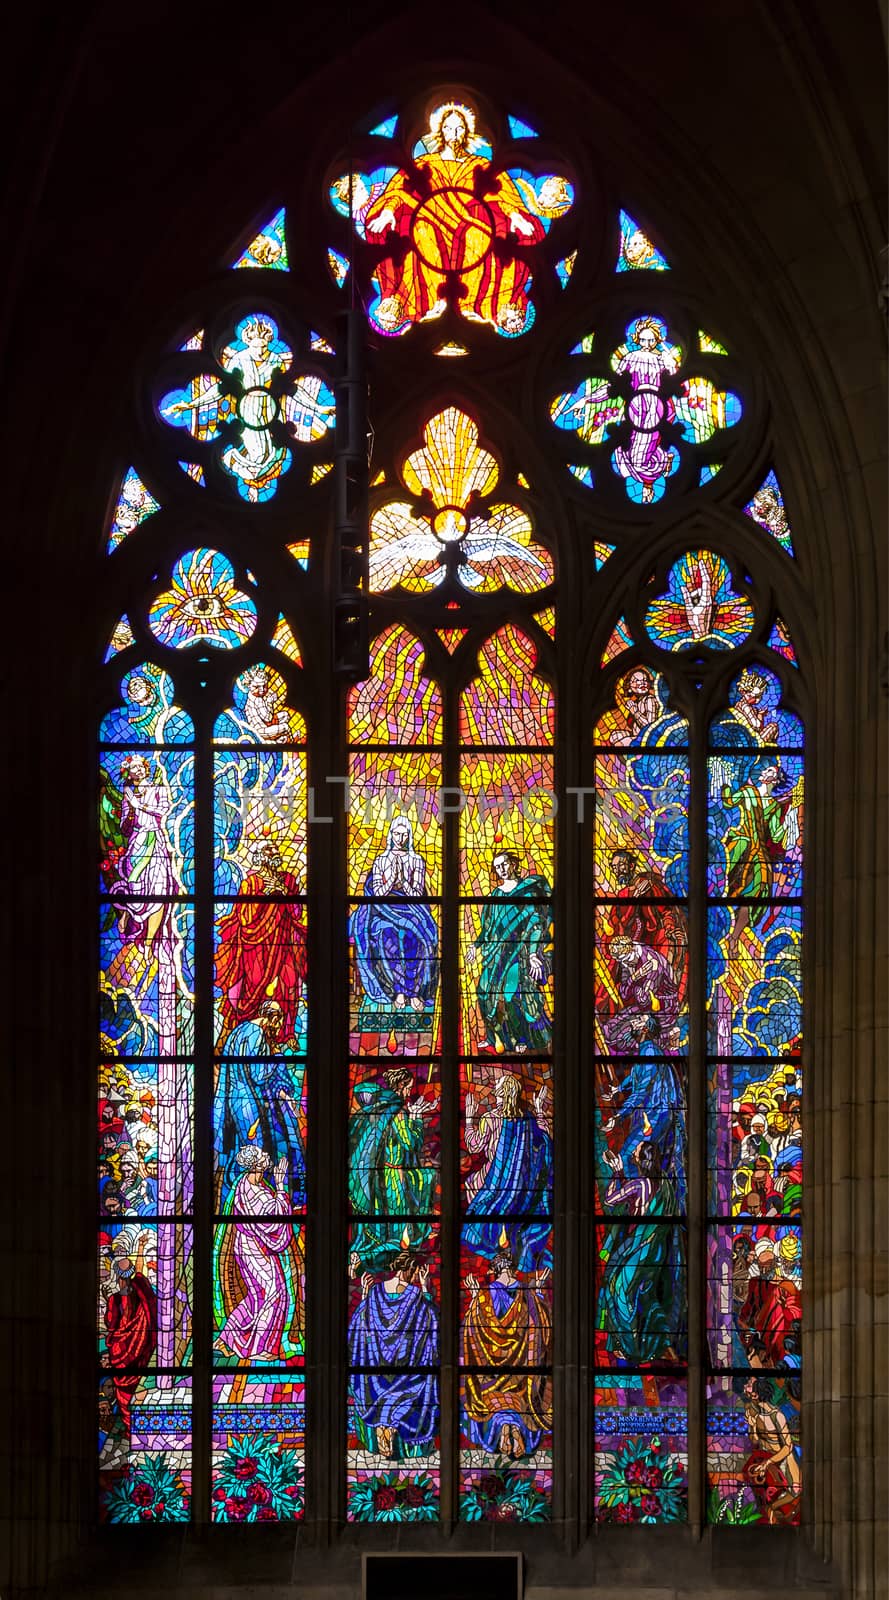 PRAGUE, CZECH REPUBLIC - FEBRUARY 19, 2015 - Stained-glass window in St Vitus Cathedral by Goodday